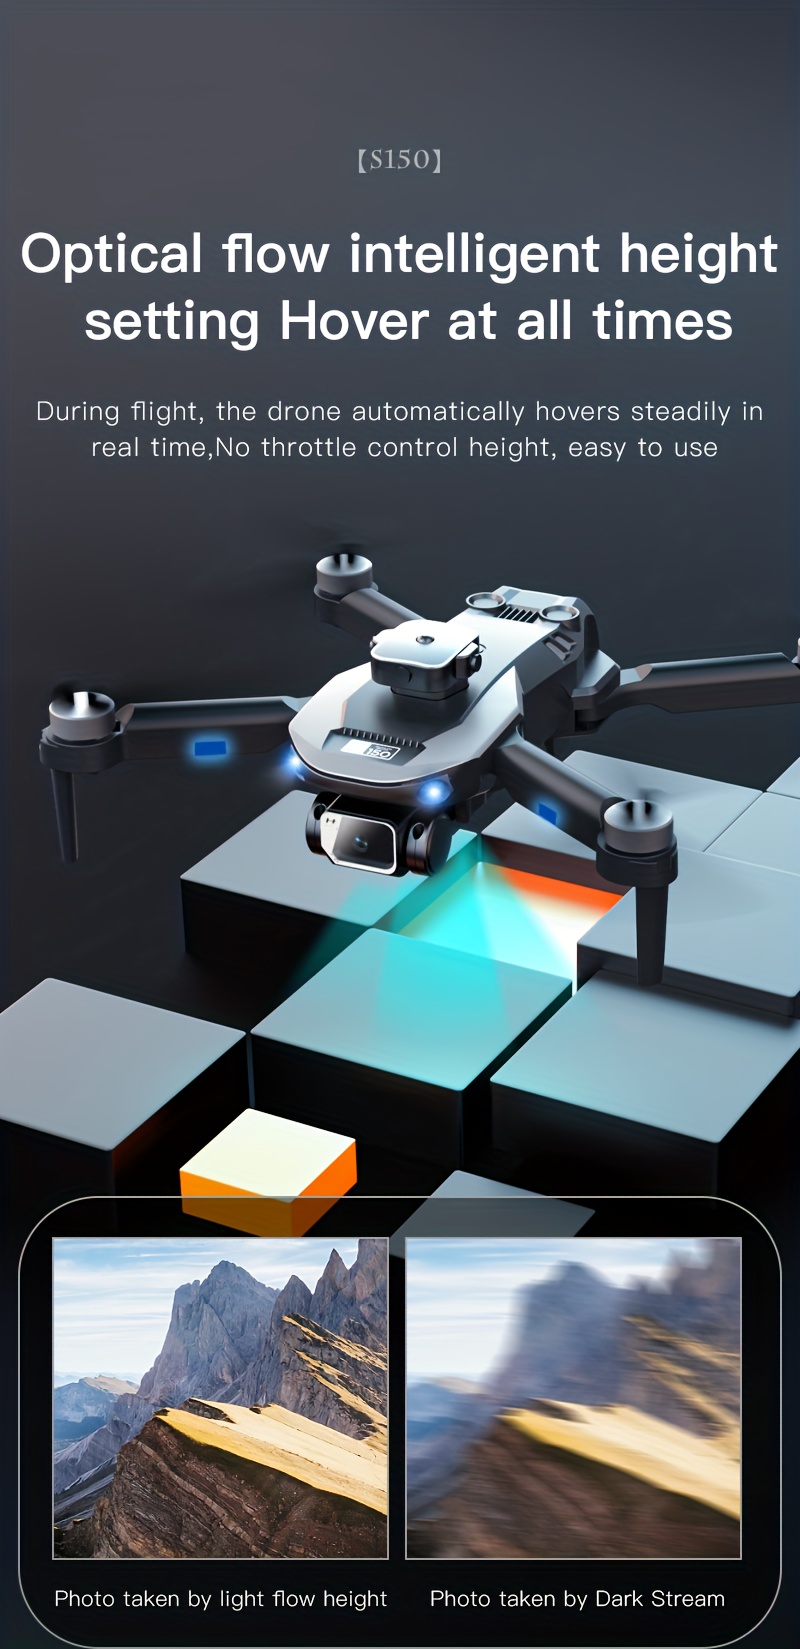 s150 hd esc dual camera drone hd optical flow positioning drone brushless motor four sided obstacle avoidance quadcopter toy uav details 6